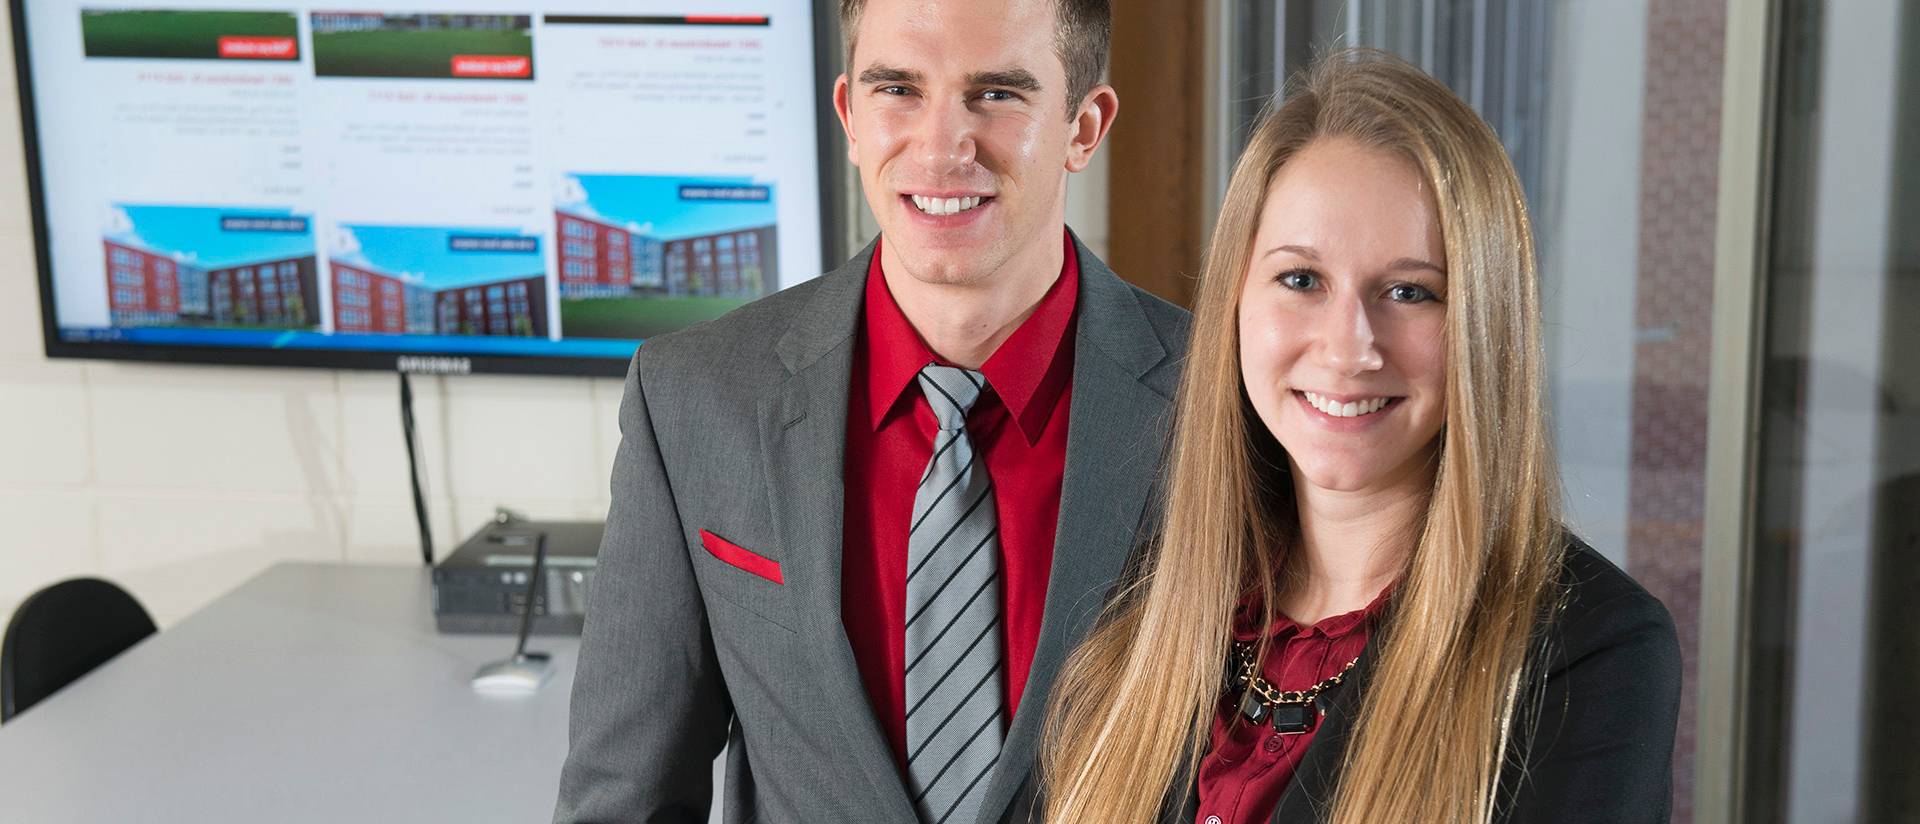 Holly and Josh Solomon's website helps students find housing